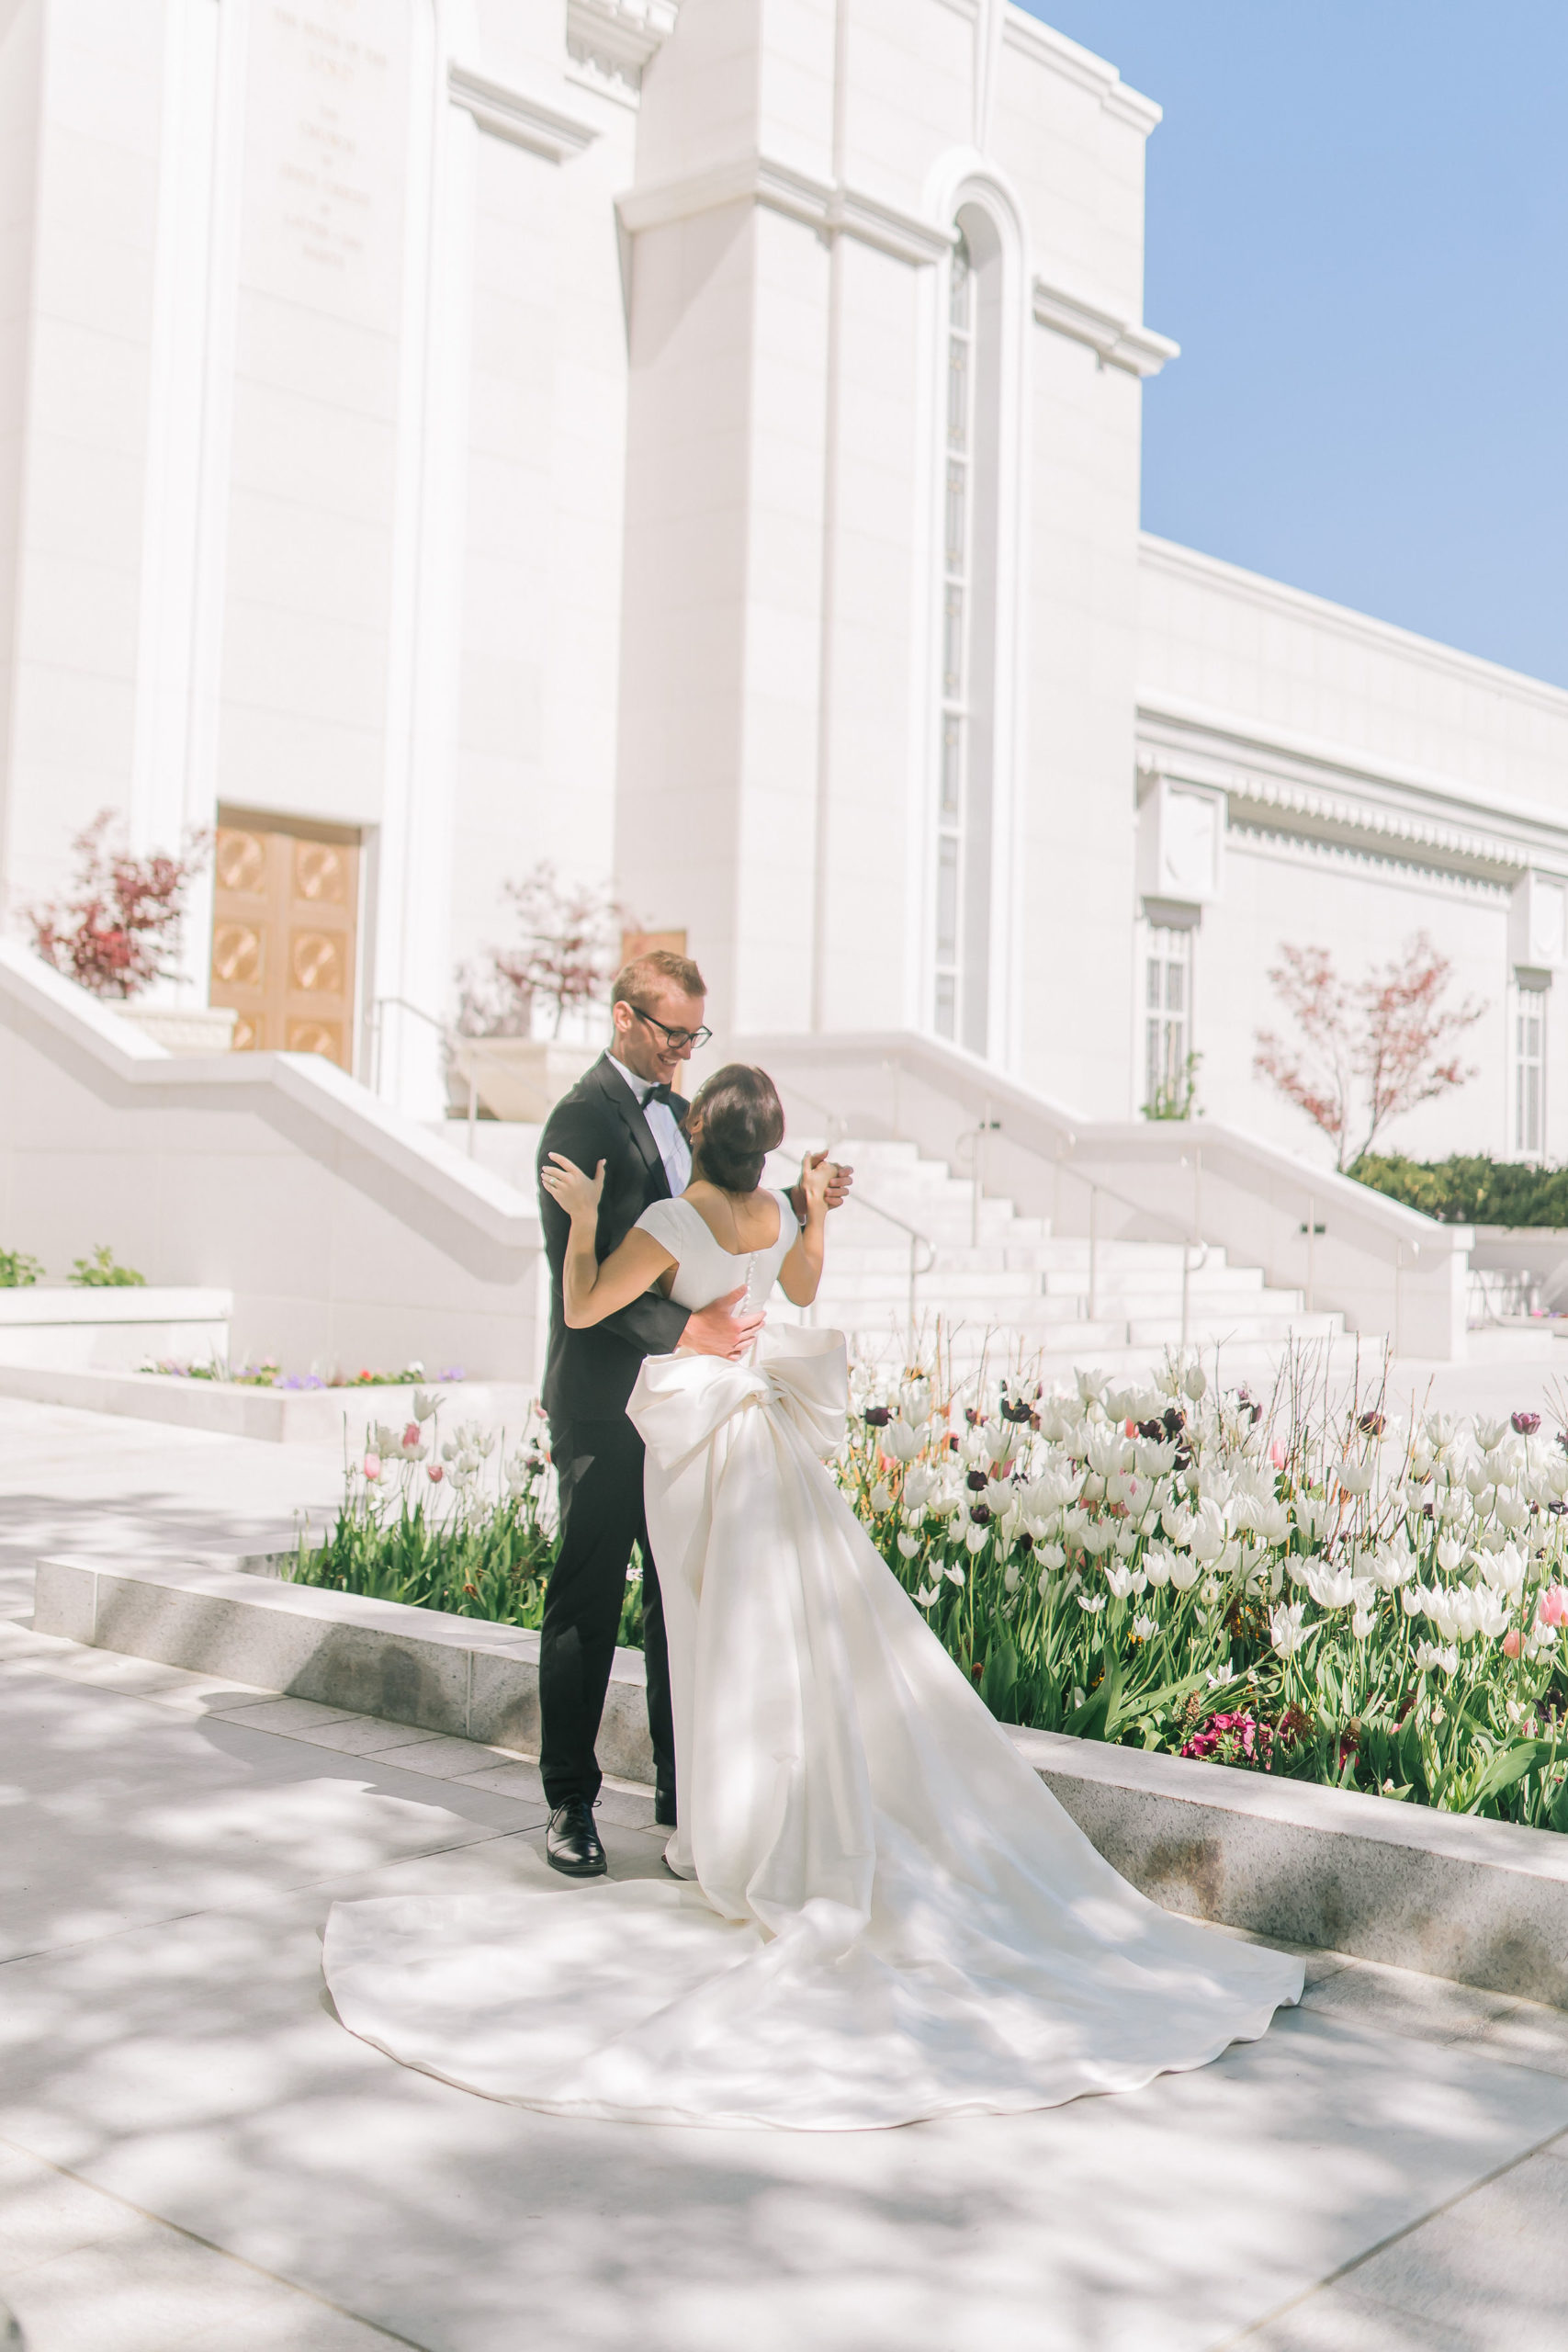 Amalfi Coast Themed Wedding bride and groom romatnically slow dancing in front of an lds temple in Utah for their wedding day